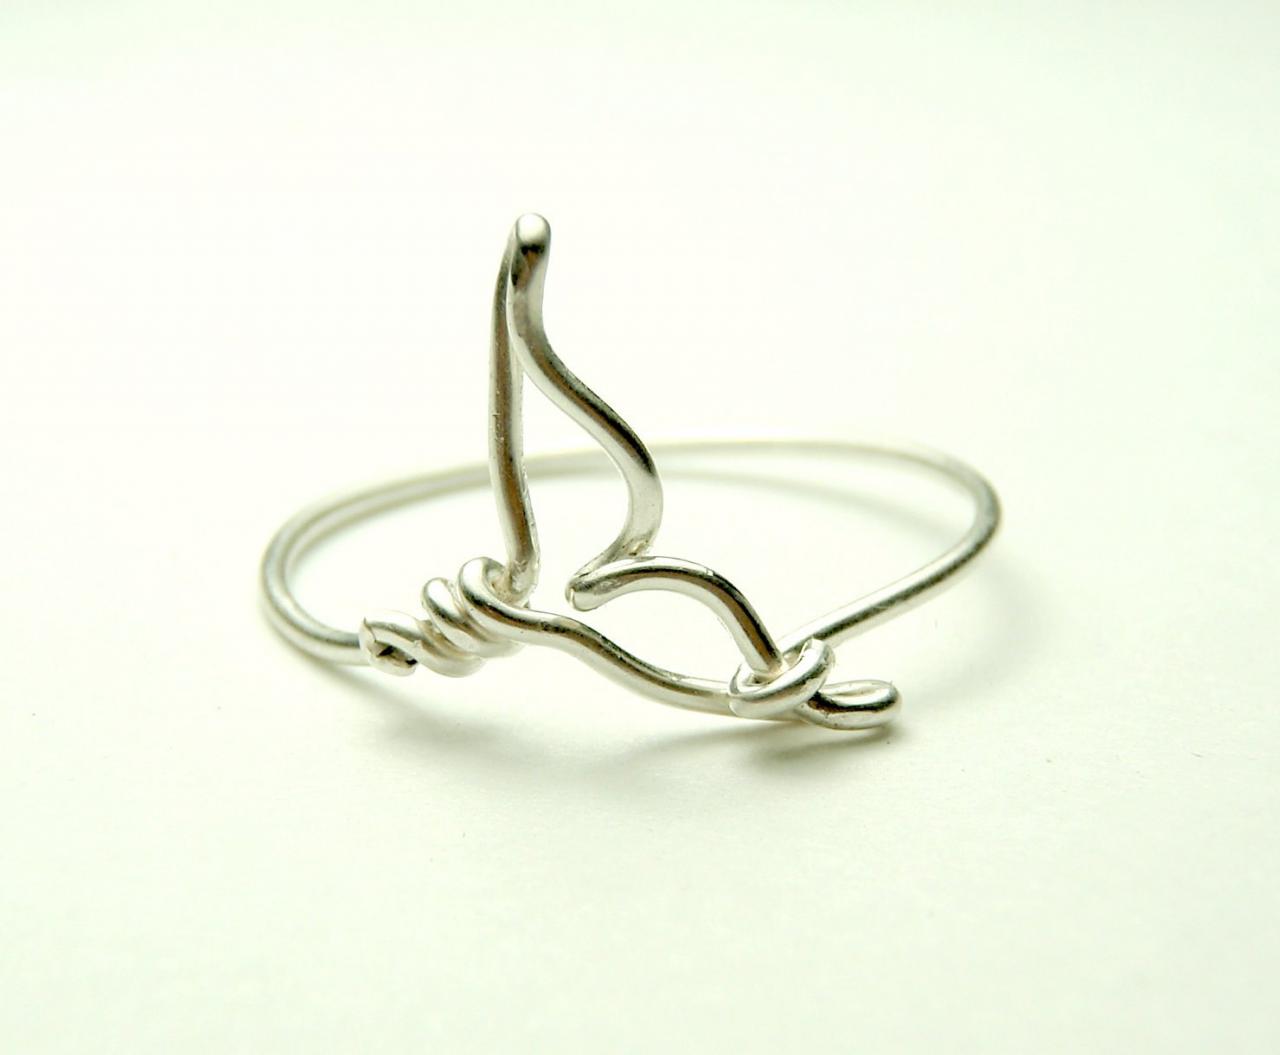 Whale Tail Wire Ring - Handmade Sterling Silver Wire 925 - Sea Whale Tail- Orca Tail Ring